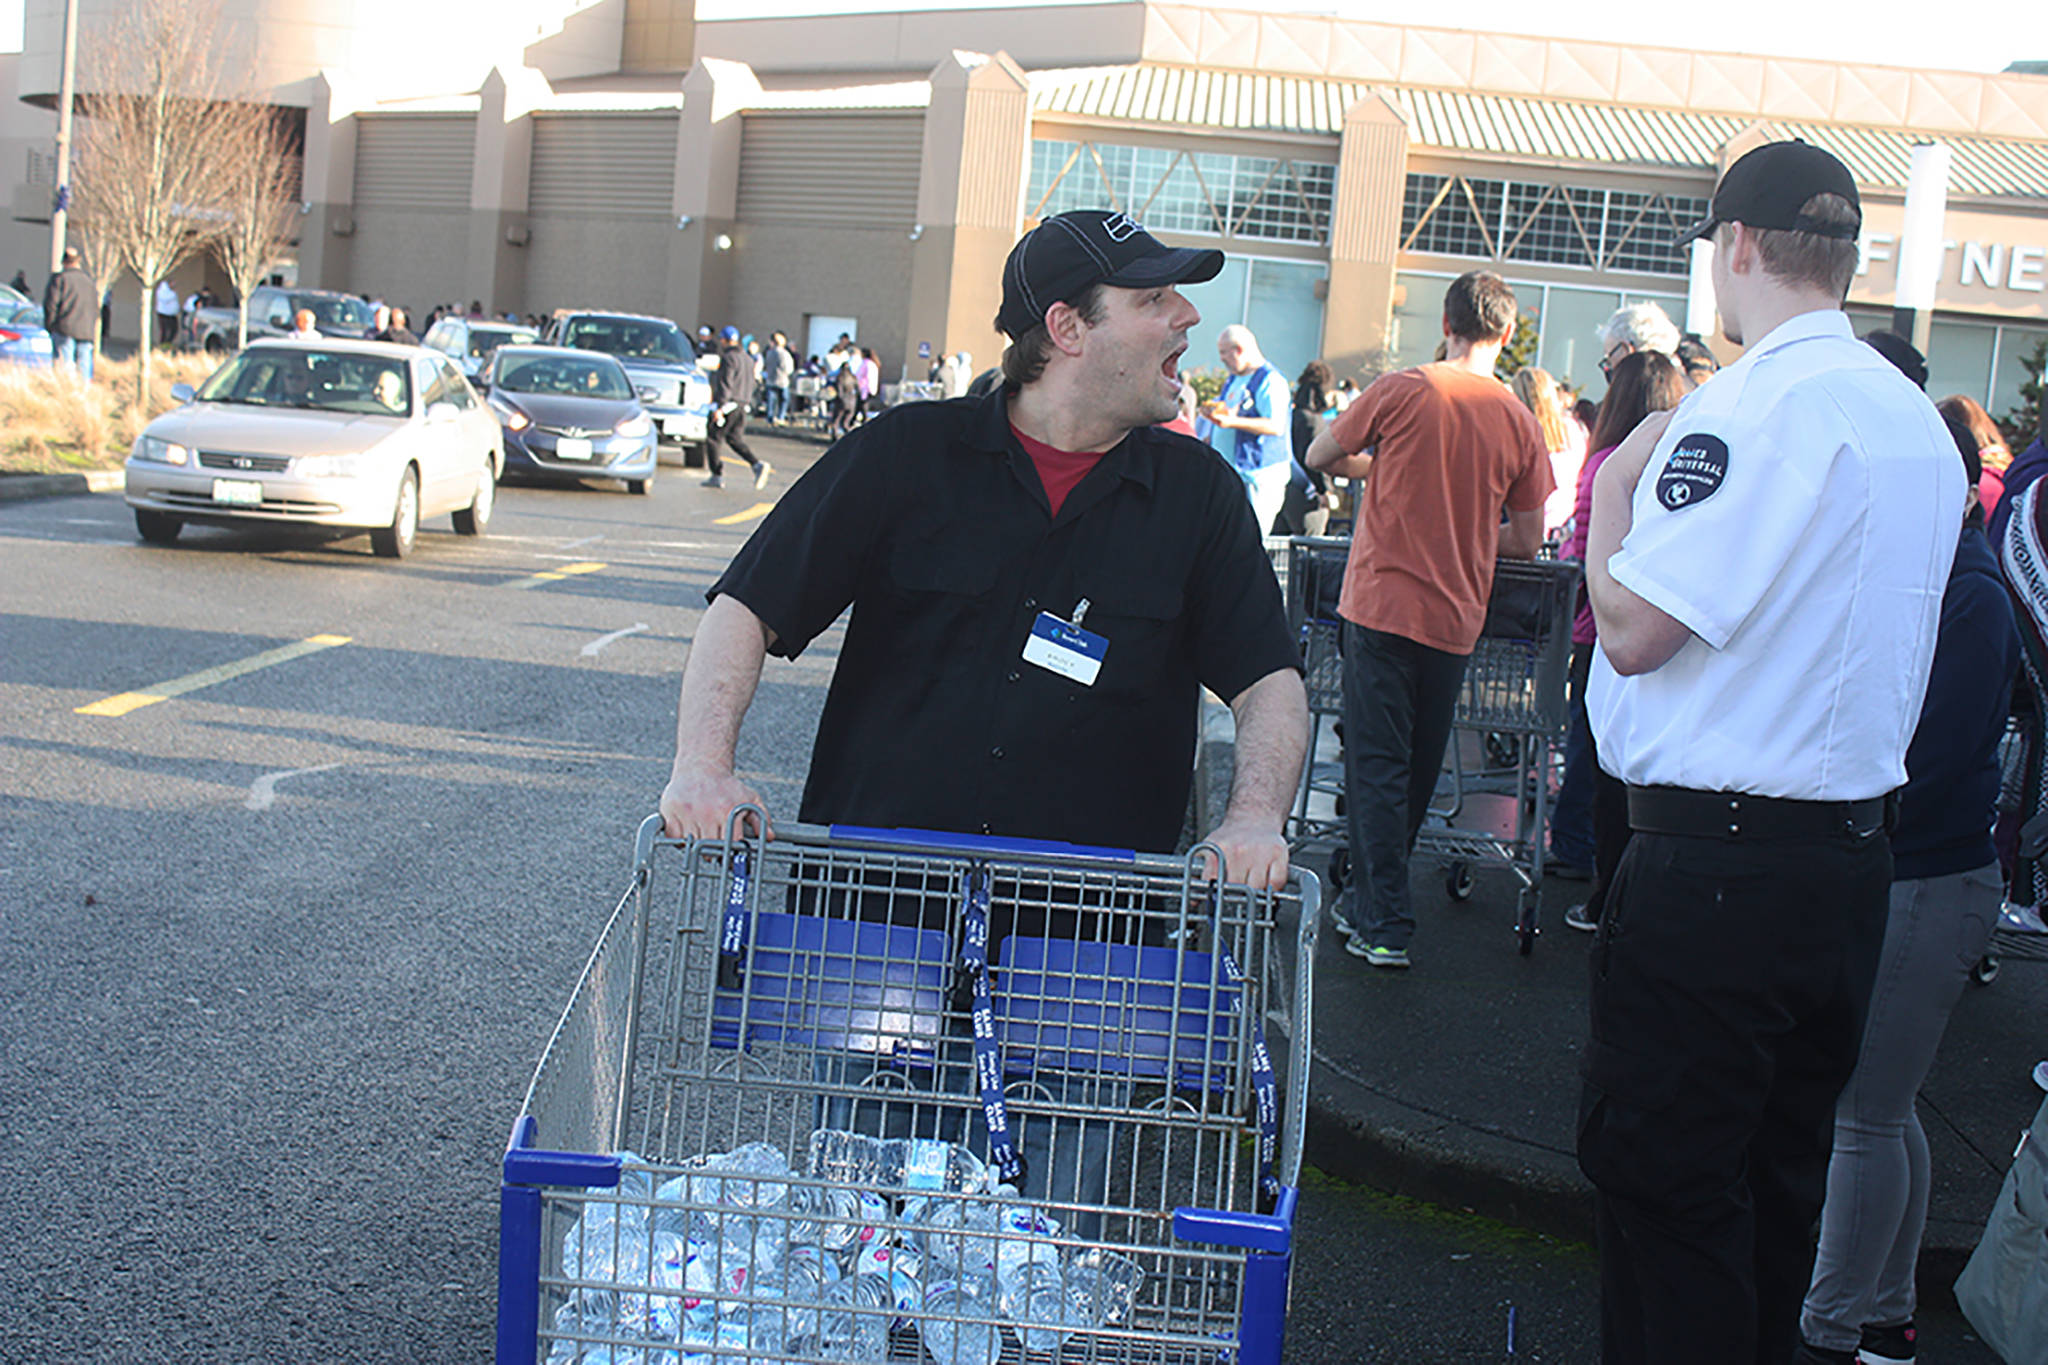 A Sam’s Club employee shouts to offer water to customers waiting patiently to get into the store on Saturday afternoon. The line stretched along one side of The Outlet Collection mall in Auburn, with patrons waiting an hour to an hour and a half to enter the bargain-selling store, which is scheduled to close Jan. 26. MARK KLAAS, Auburn Reporter